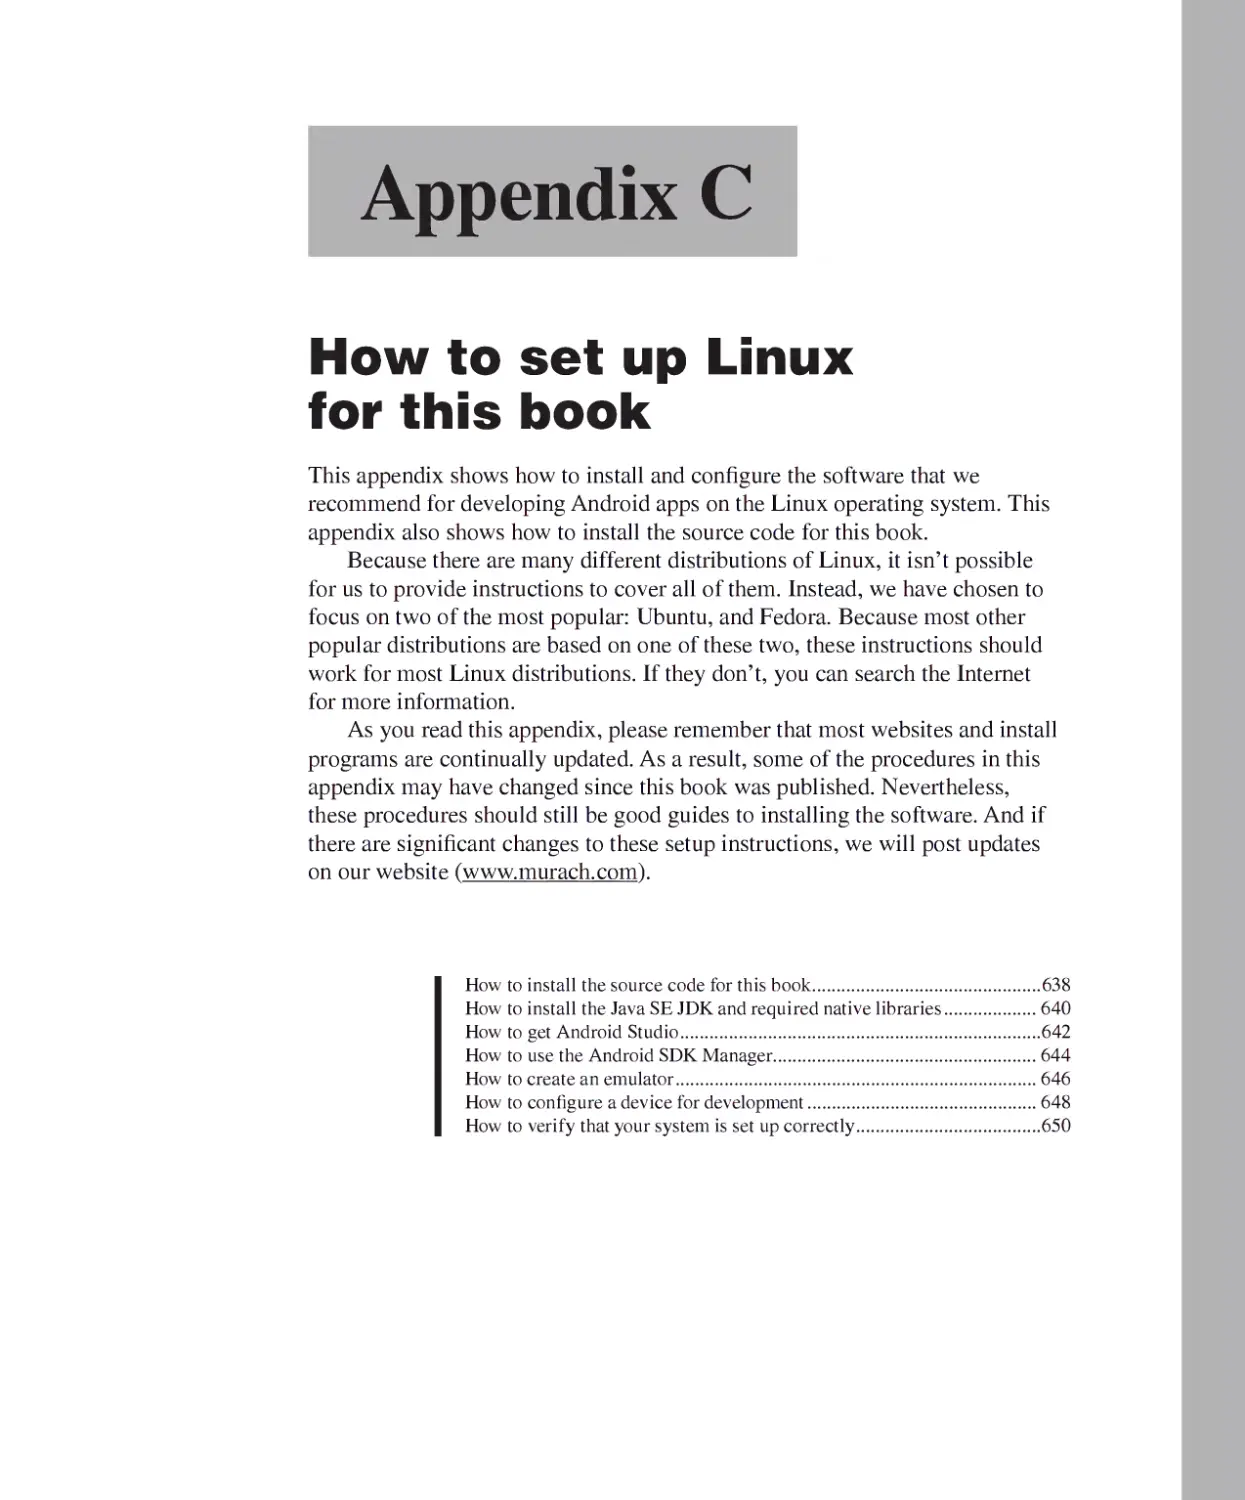 Appendix C - How to Set Up Linux for This Book